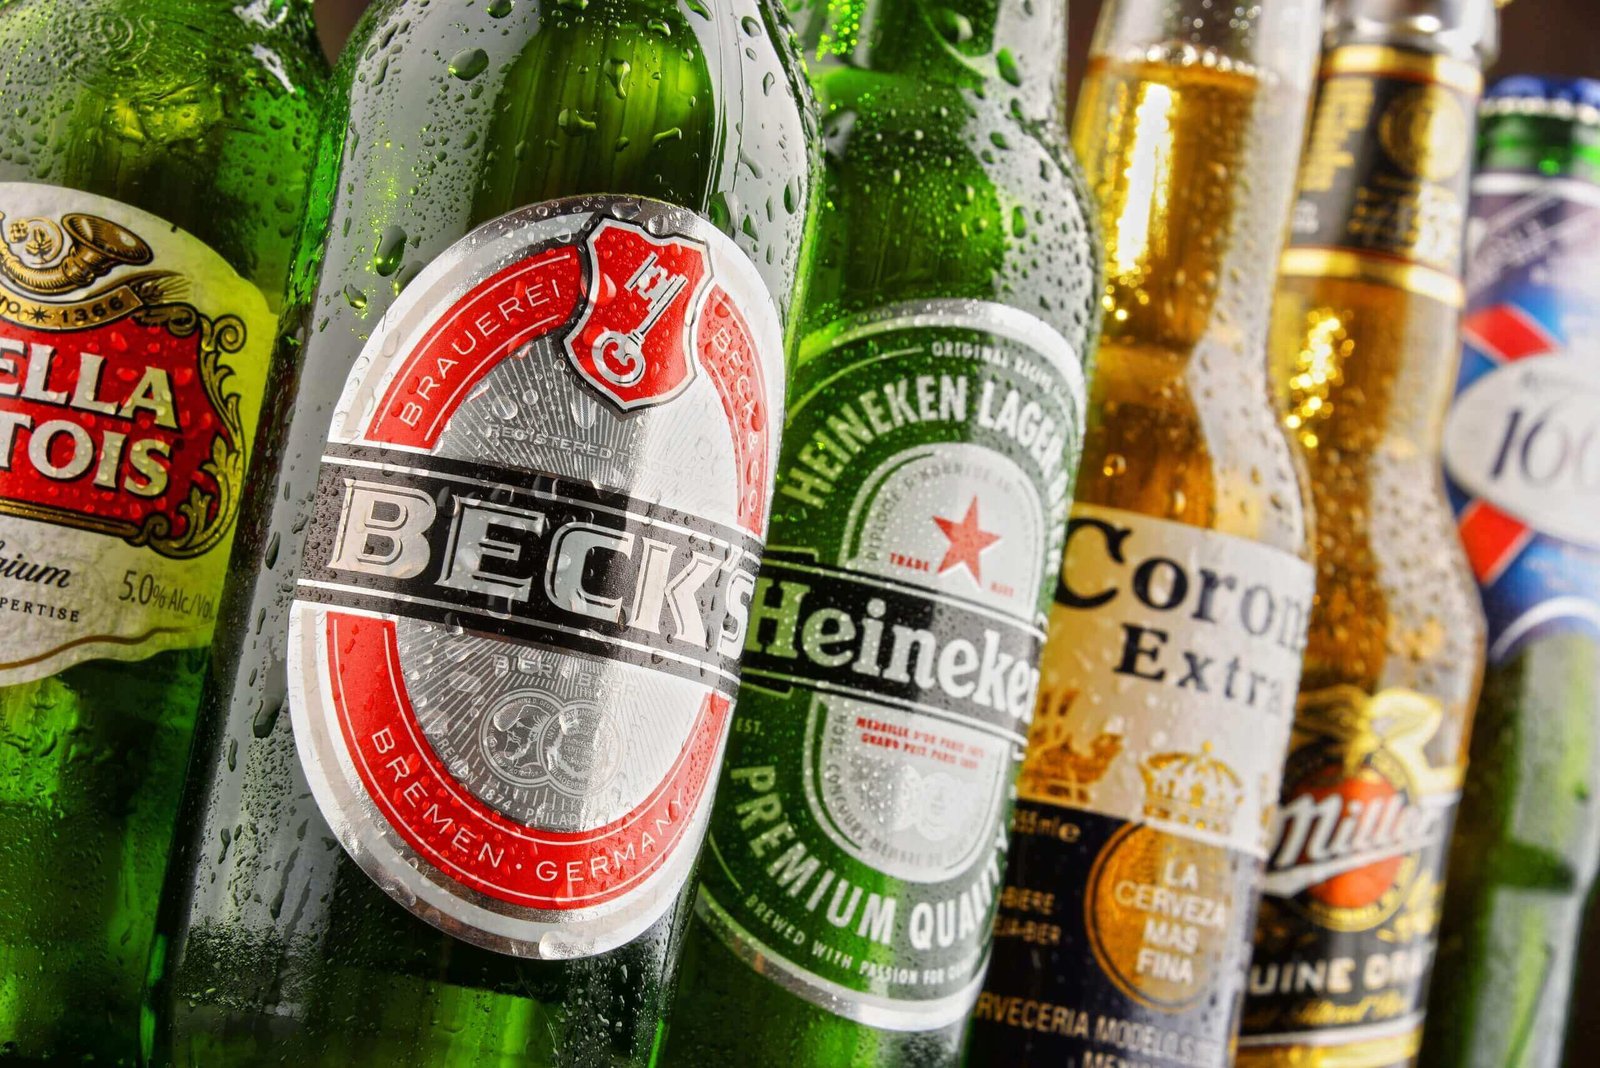 Discover the top beer brands in the UK, Learn about popular lagers like Guinness, Carling, and Stella Artois, BrewDog